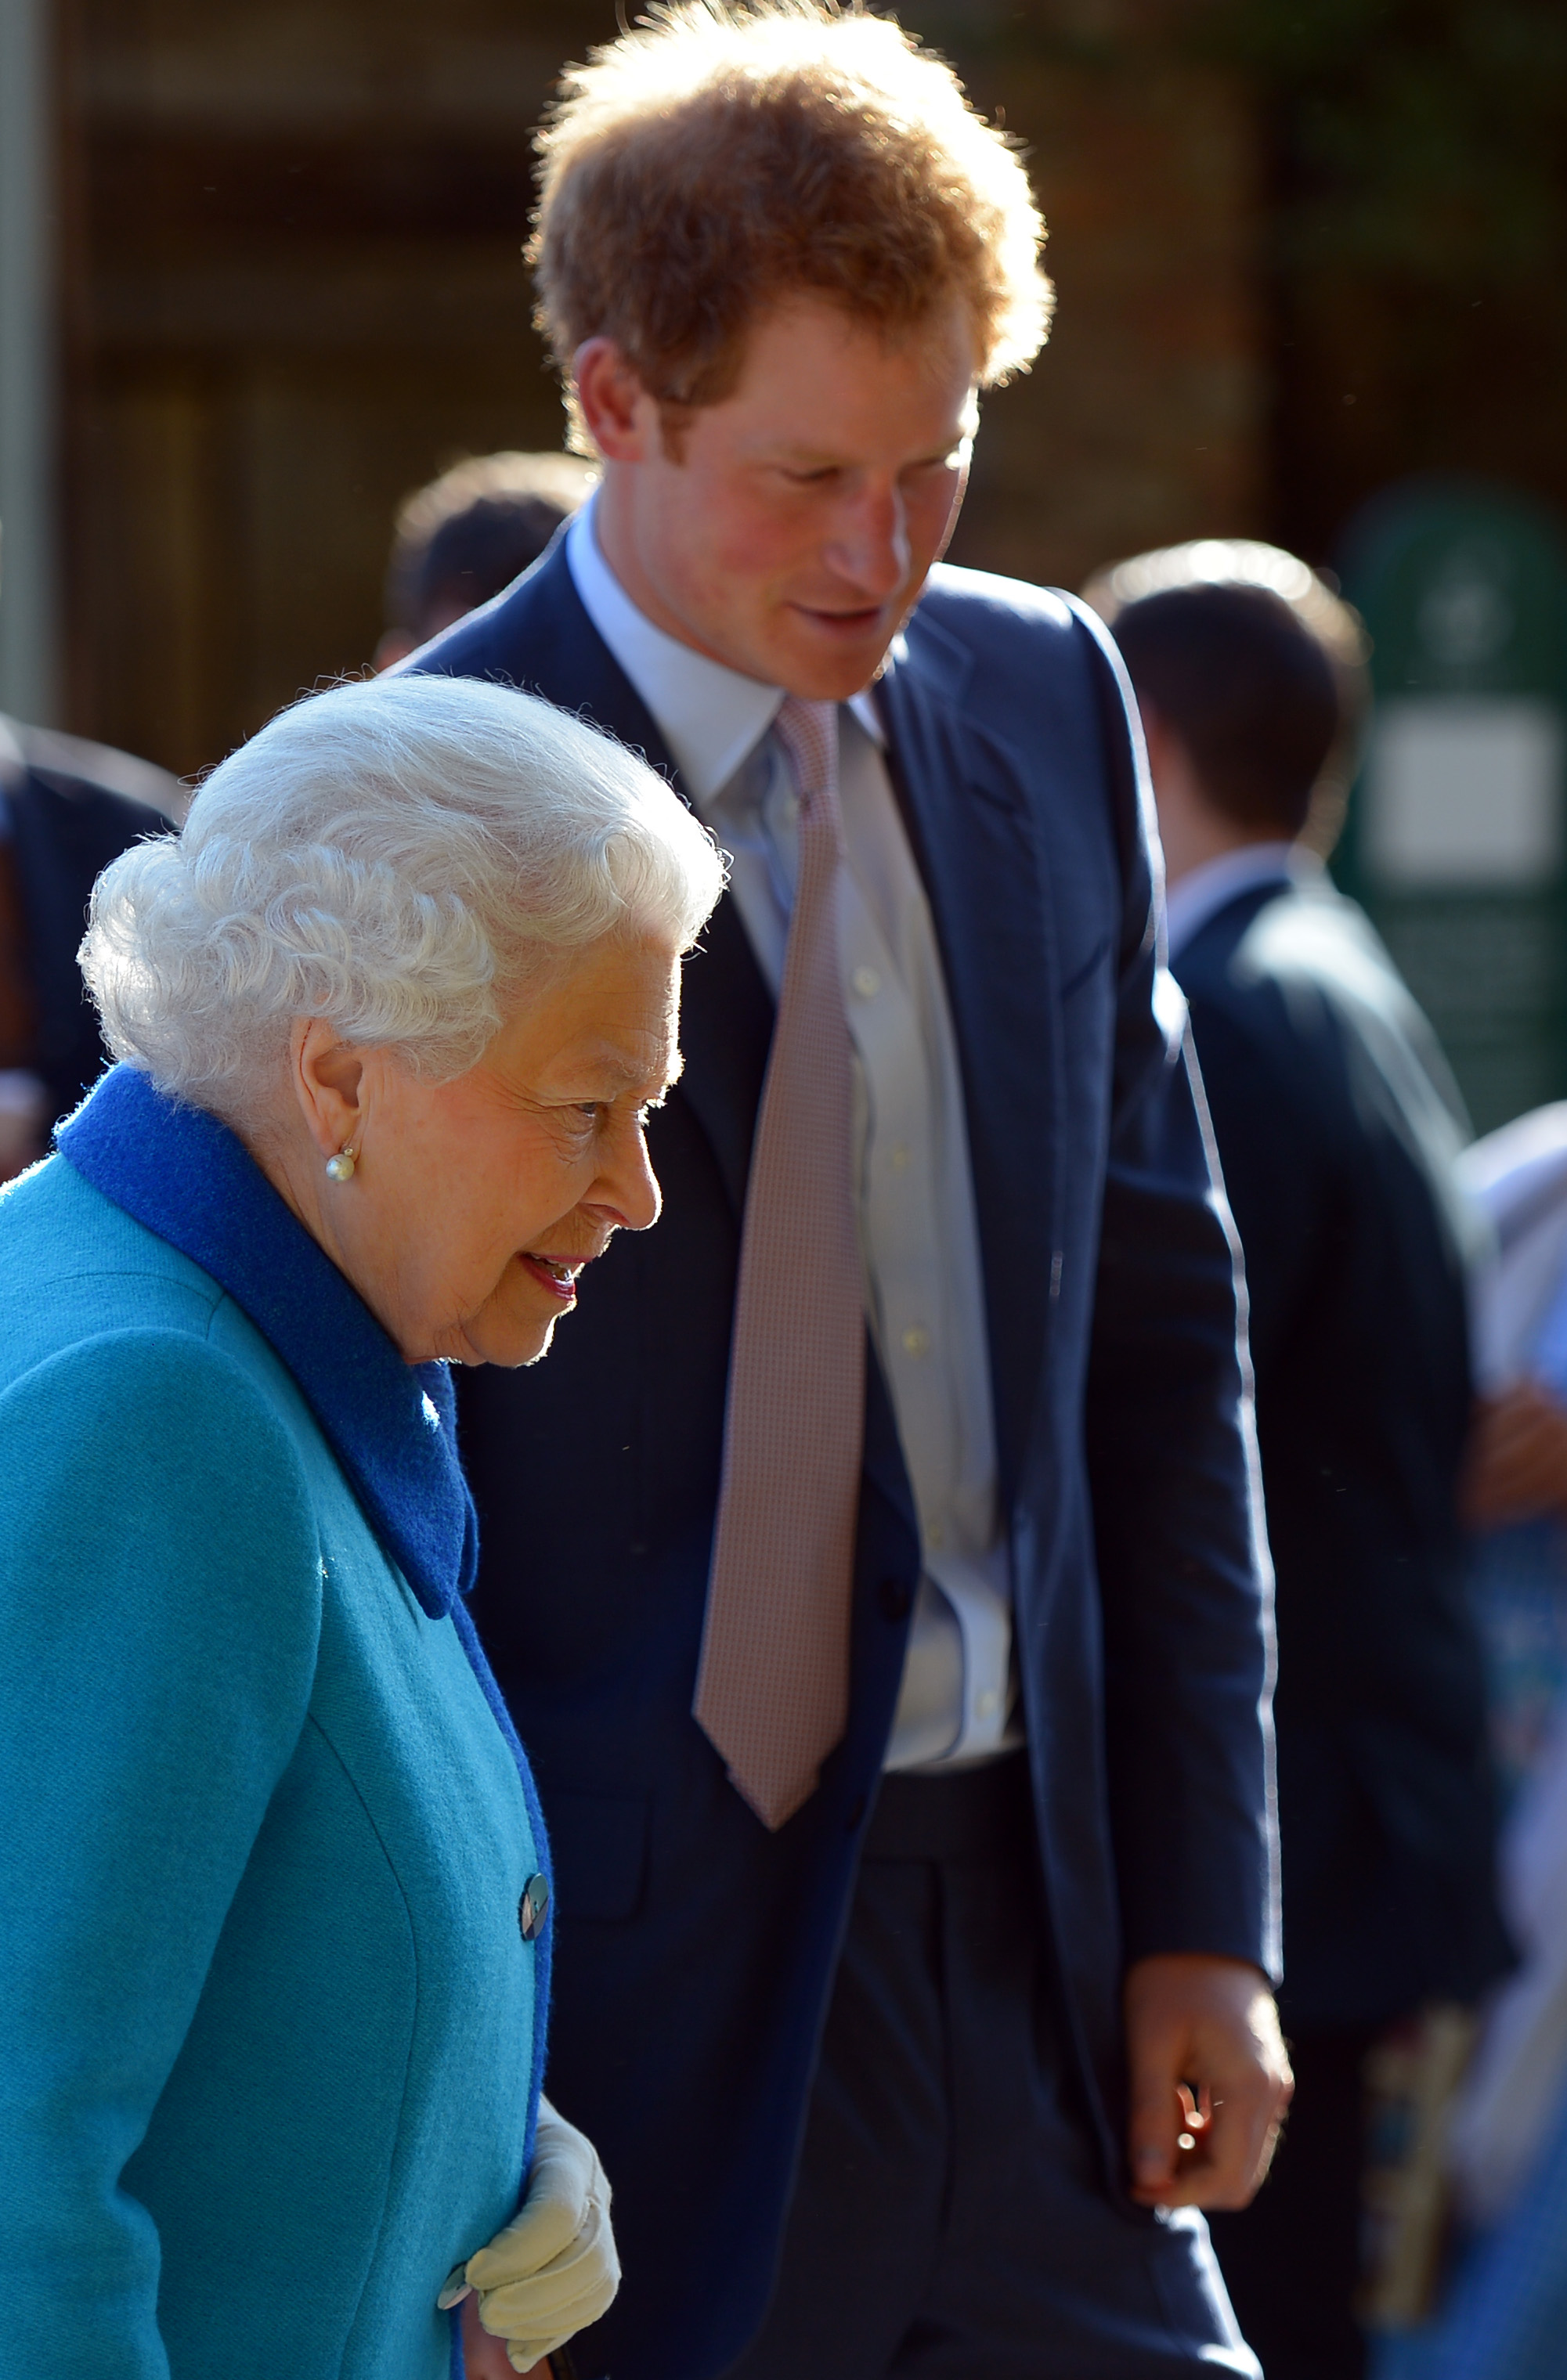 The late Queen Elizabeth II and Prince Harry (Image: Getty Images)